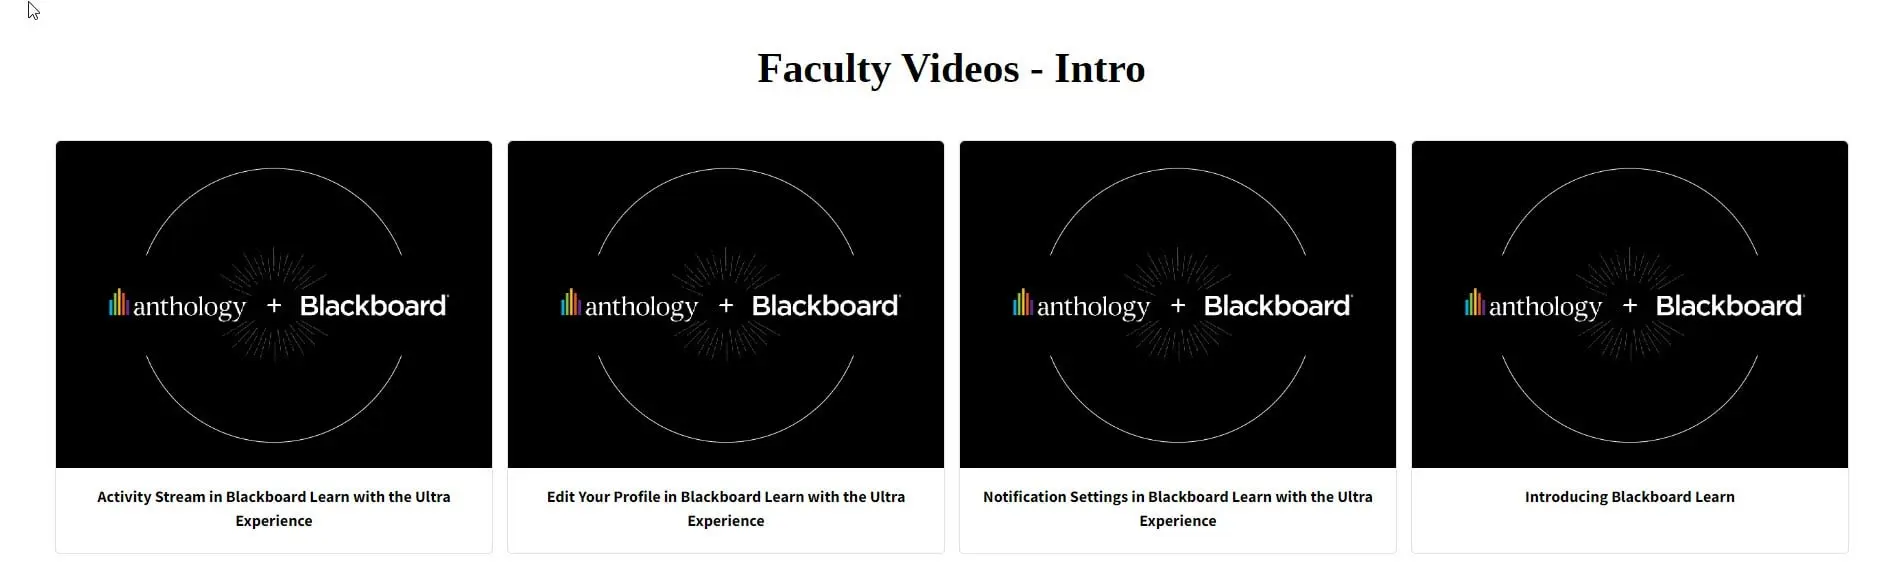 Blackboard Ultra Video and Help Resource Page